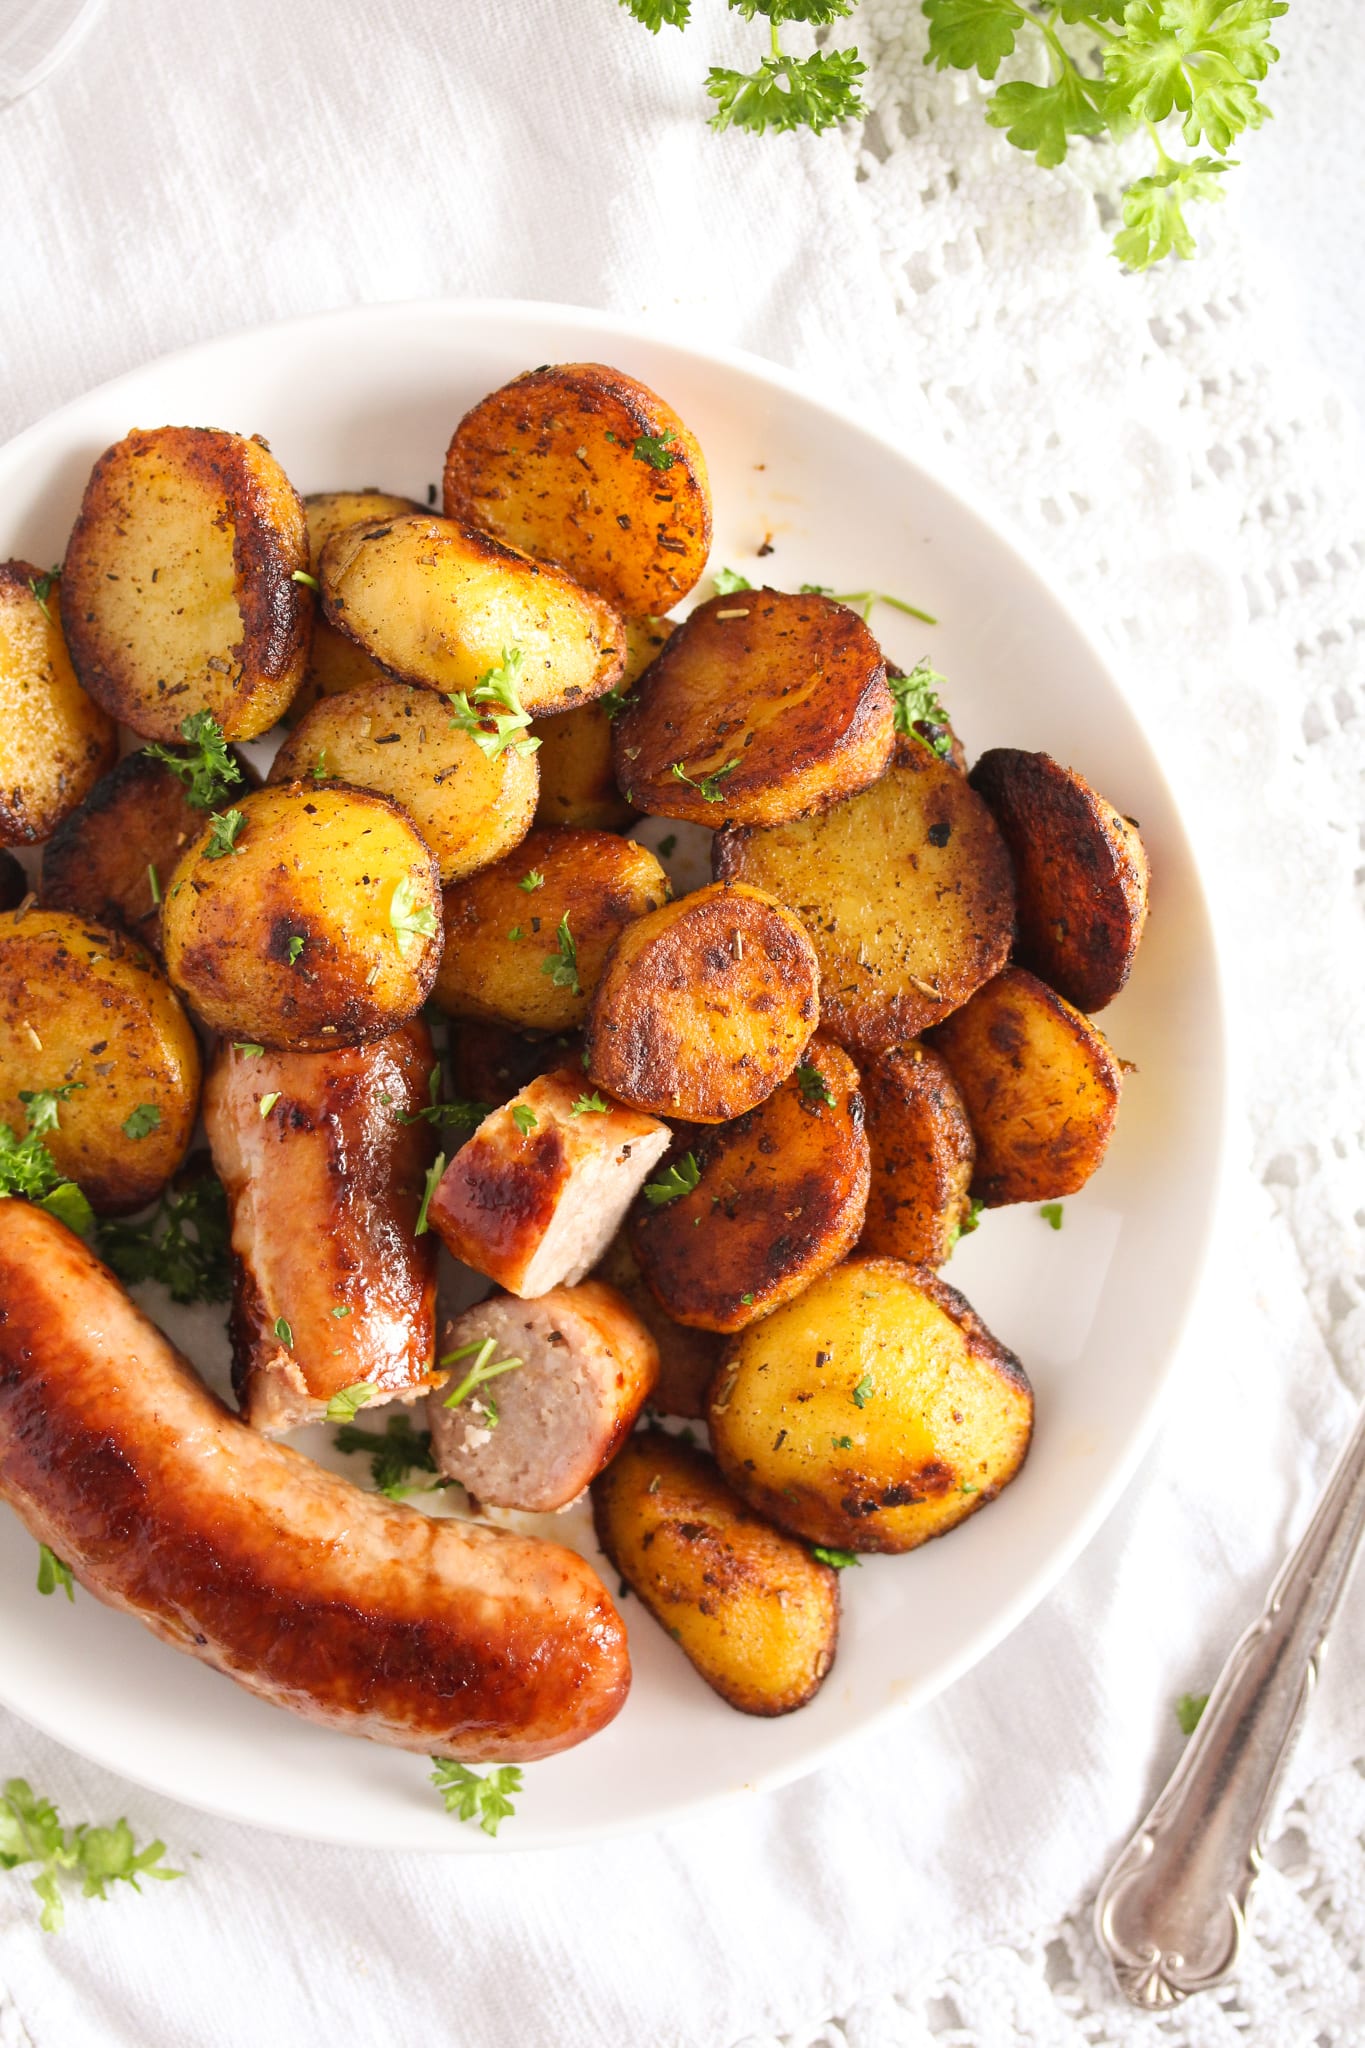 brats and fried potatoes on a small white plate overhead image.